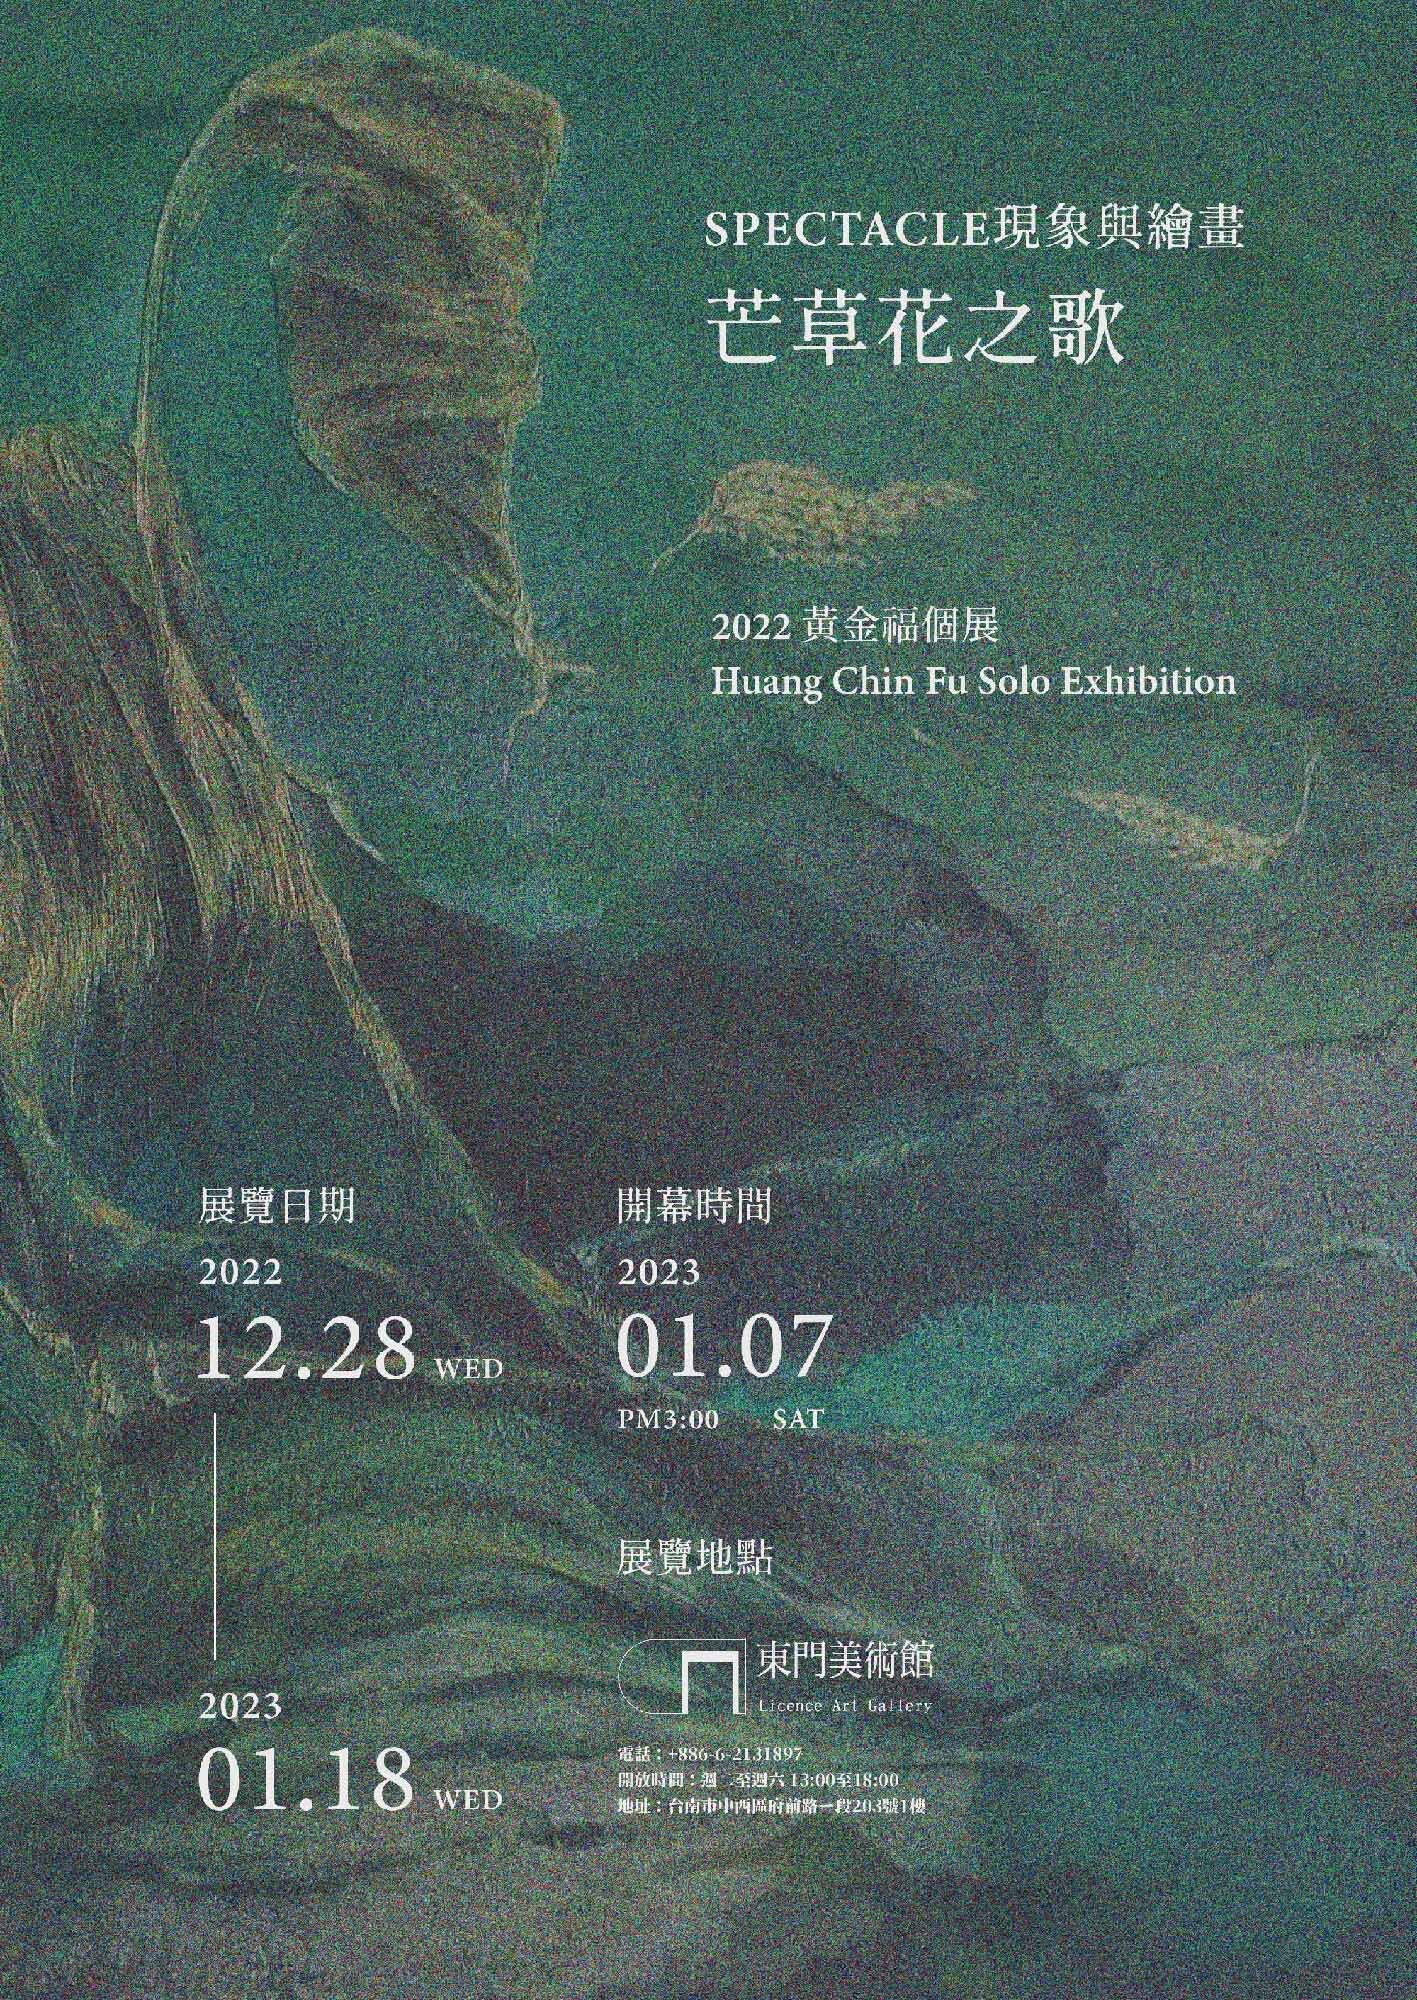 SPECTACLE現象與繪畫—芒草花之歌2022黃金福個展 Huang Chin Fu Solo Exhibition